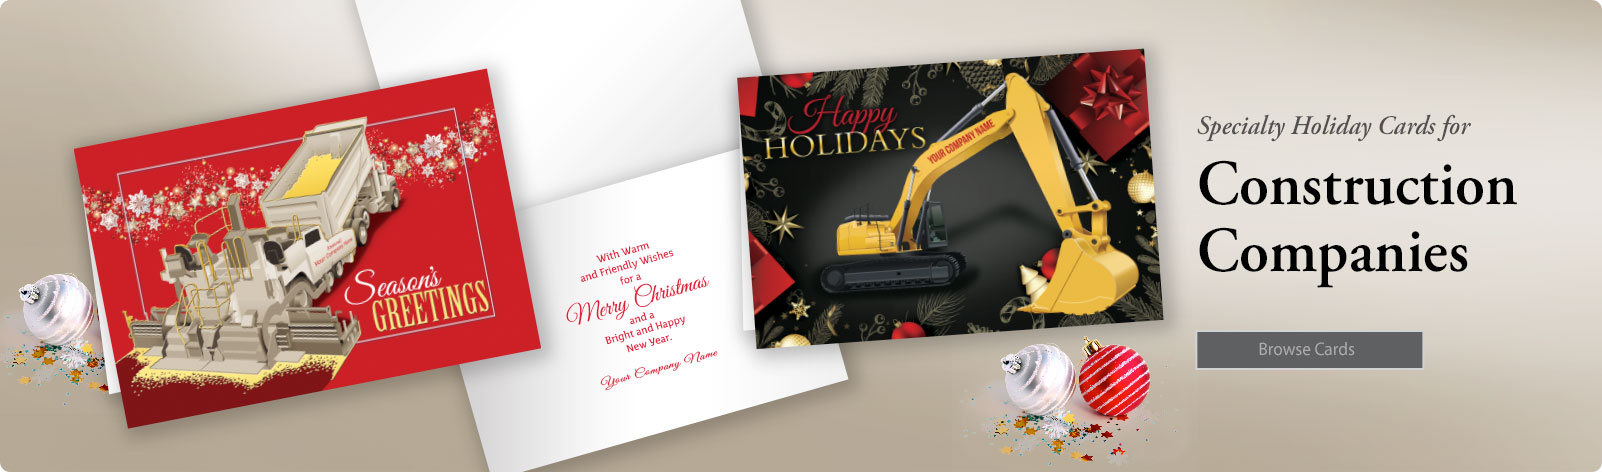 Personalized Construction-Excavating-Paving & Refuse Christmas Holiday Cards!